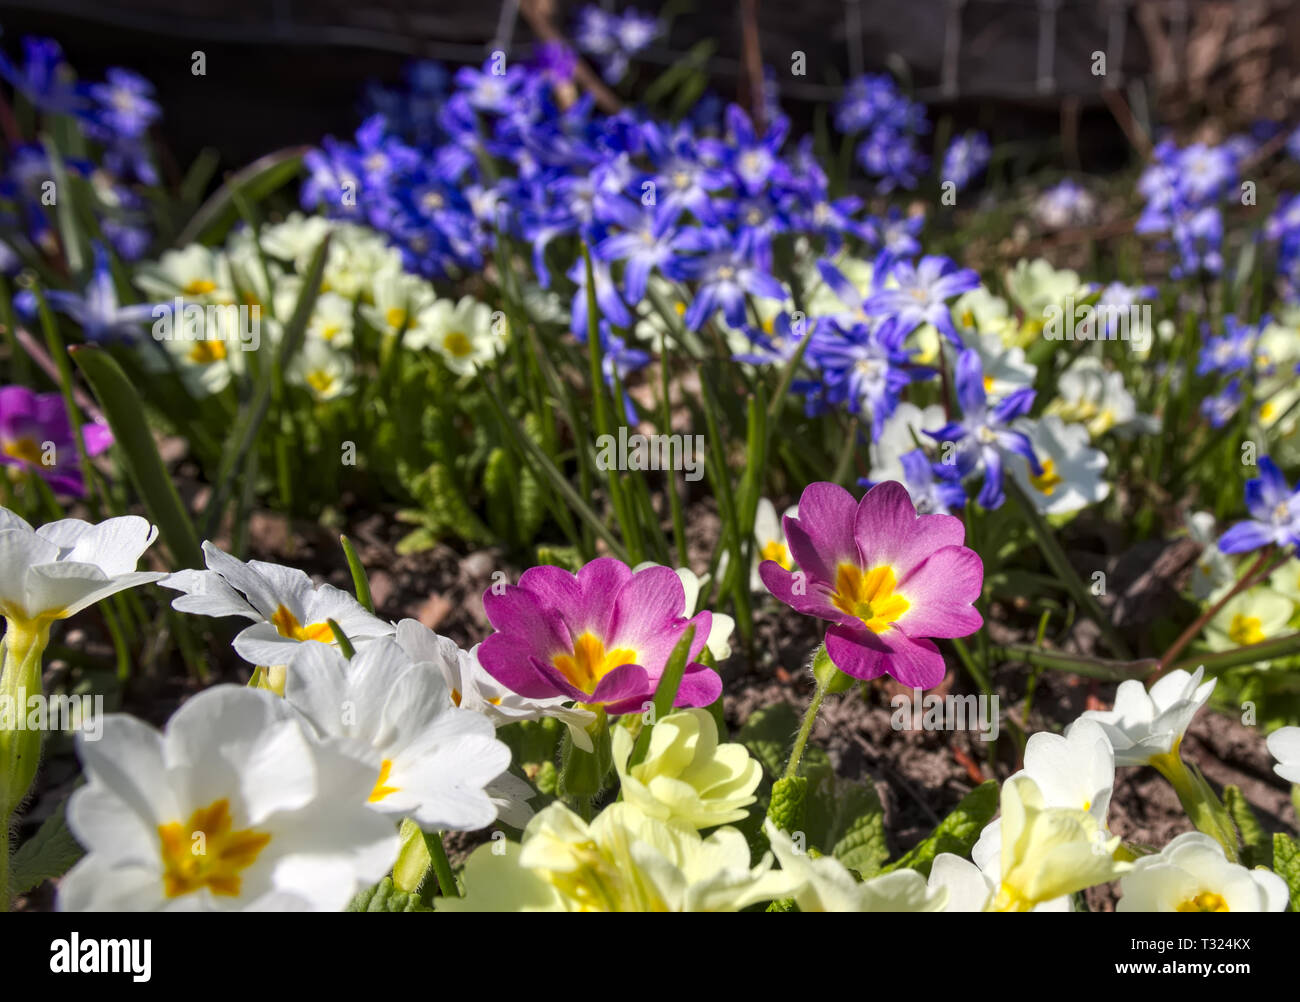 Close up of colorful spring flower field (Primel, siberian squill). Stock Photo